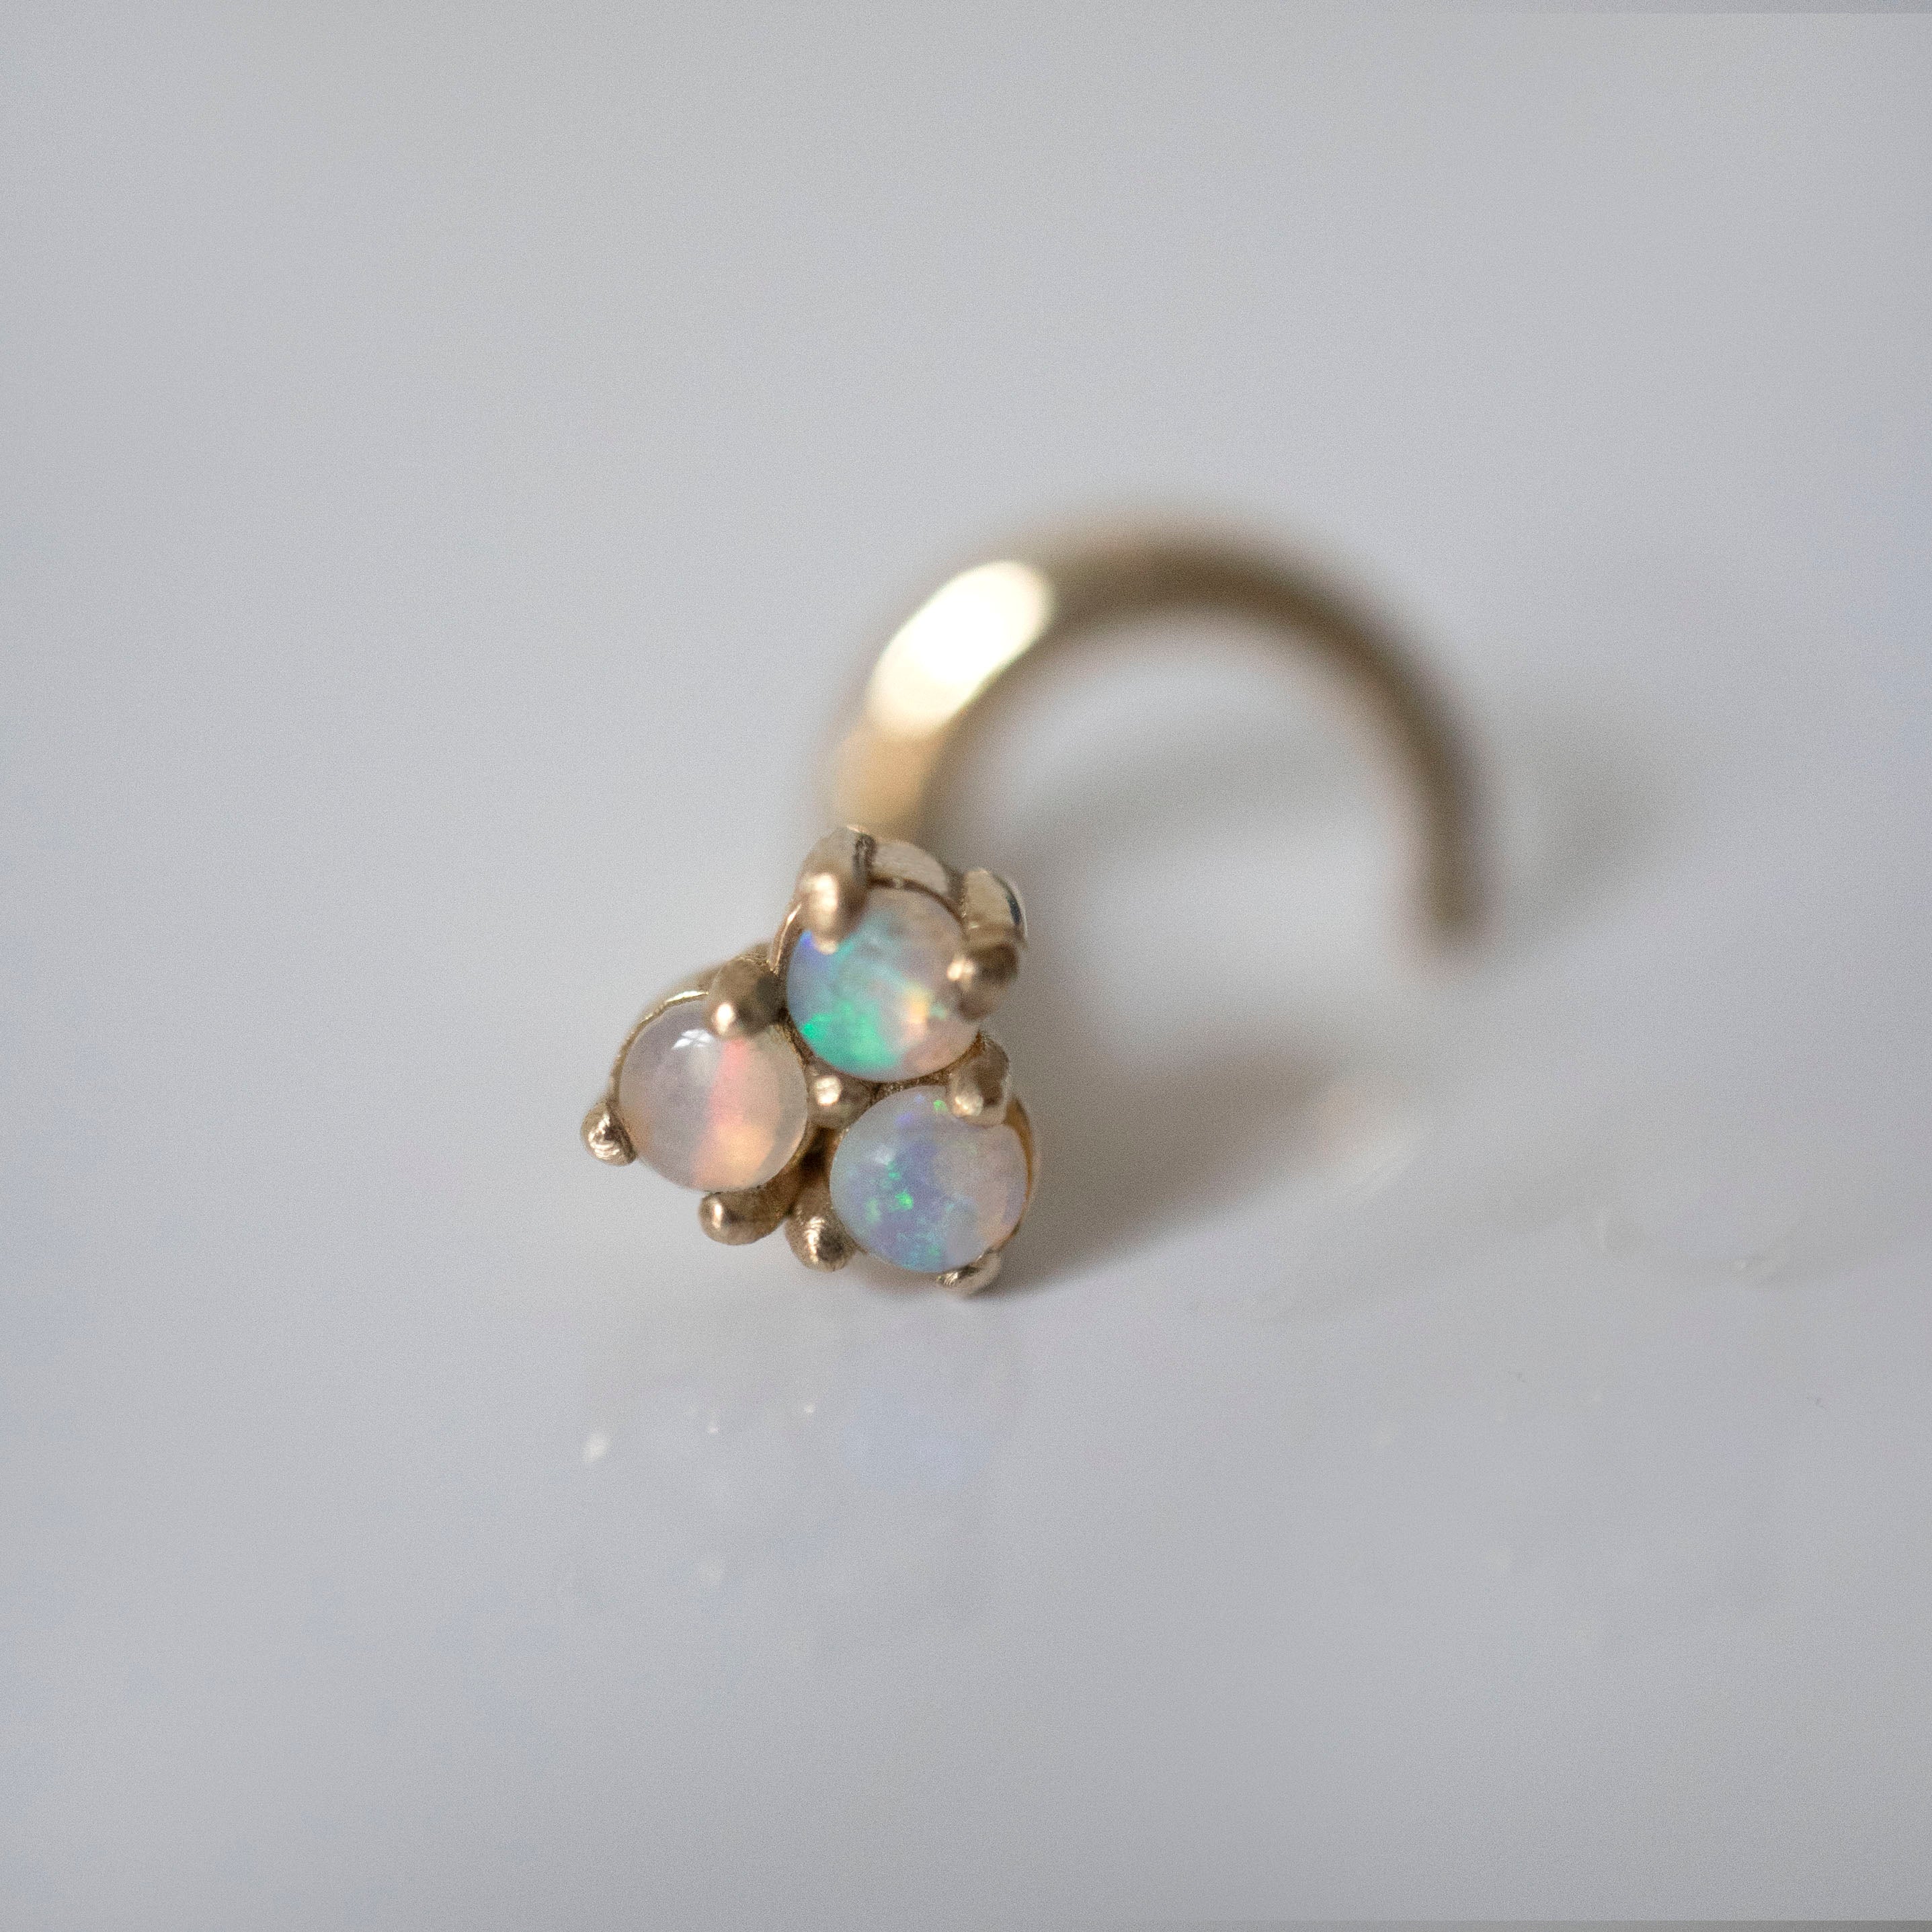 Opal Nose Ring 14K Solid Yellow Gold 3mm White Opal Nose Stud Tragus  Earring Cartilage Earring Nose Jewelry Nose Piercing - Etsy